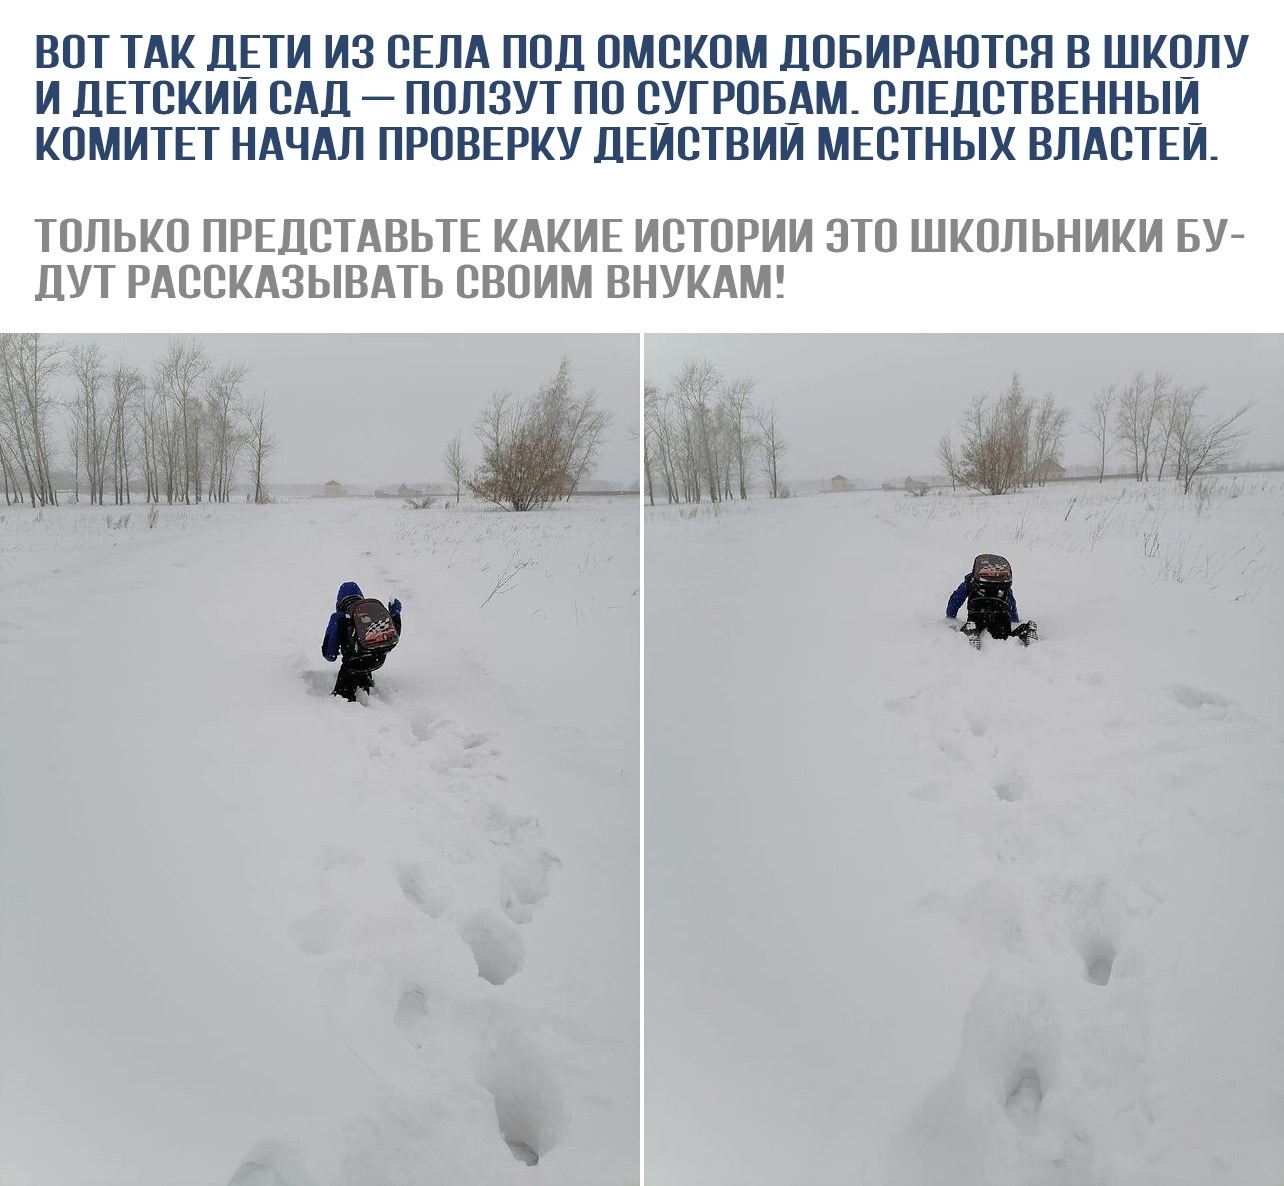 How do they say they got to school? - School, Village, Omsk, Children, Jungle, Snow, Snowdrift, Picture with text